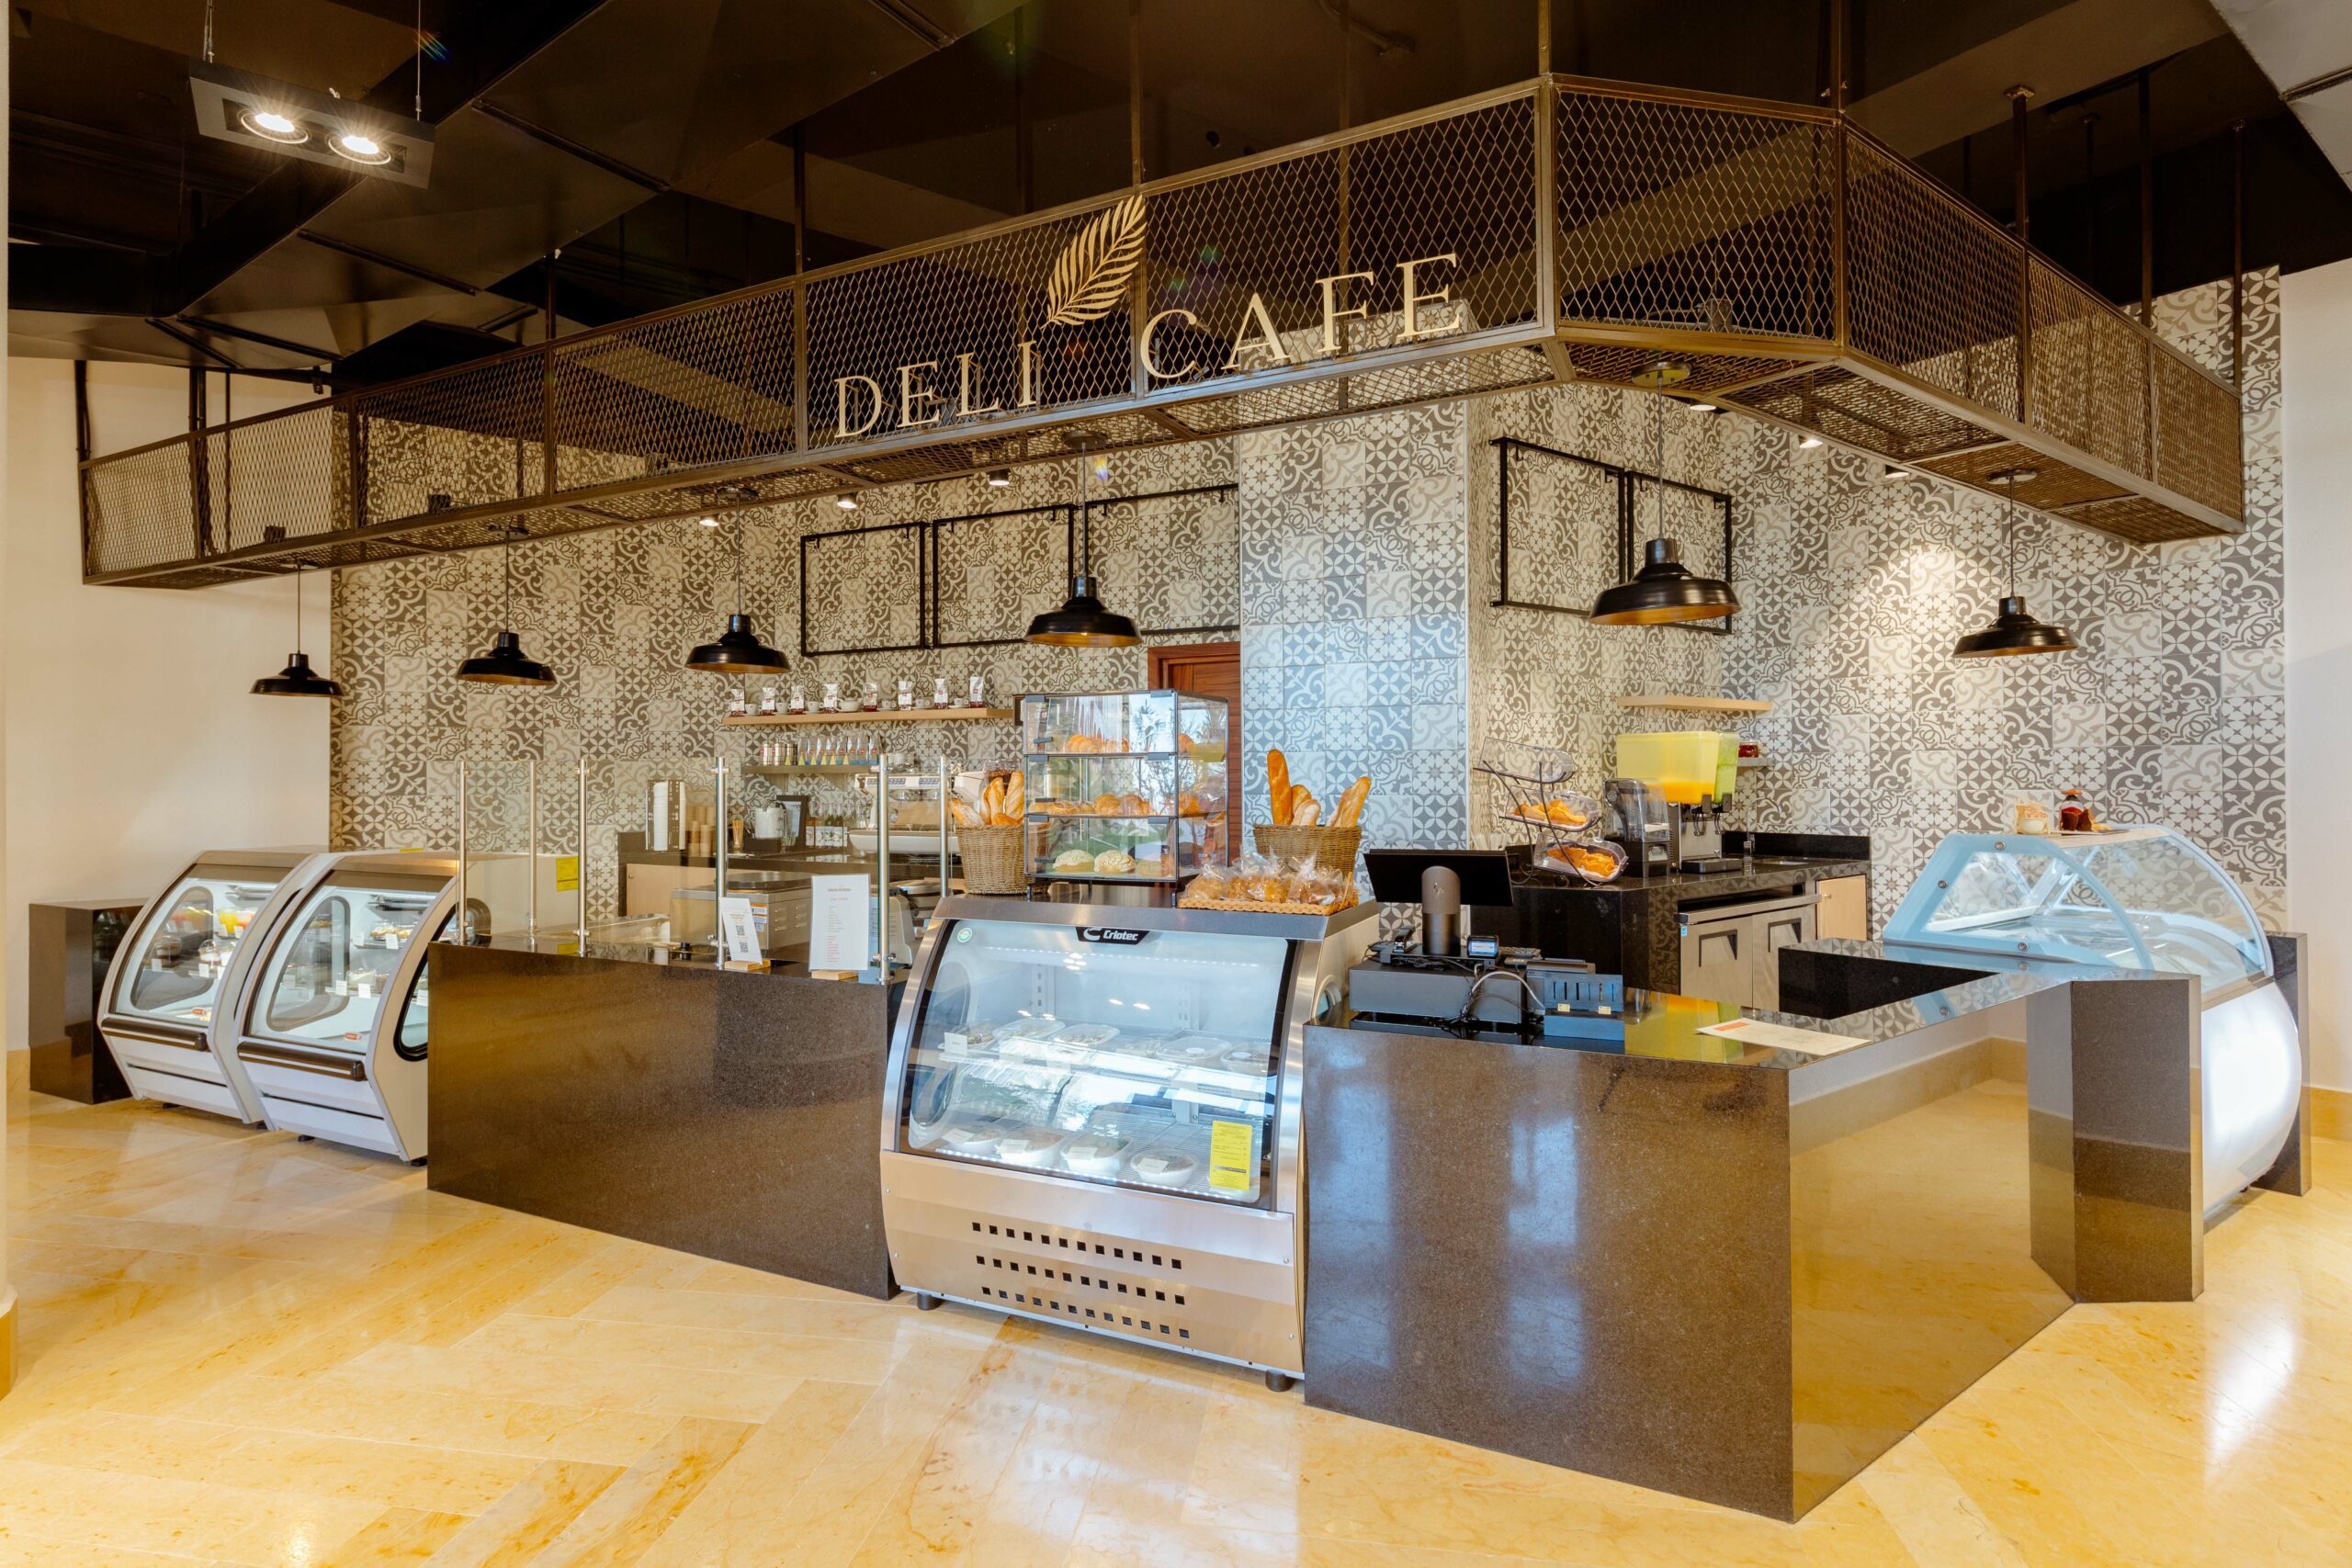 the Deli at Palmita Market is the right place for you and your family to either satisfy an appetite for sweets or to grab a snack on the go